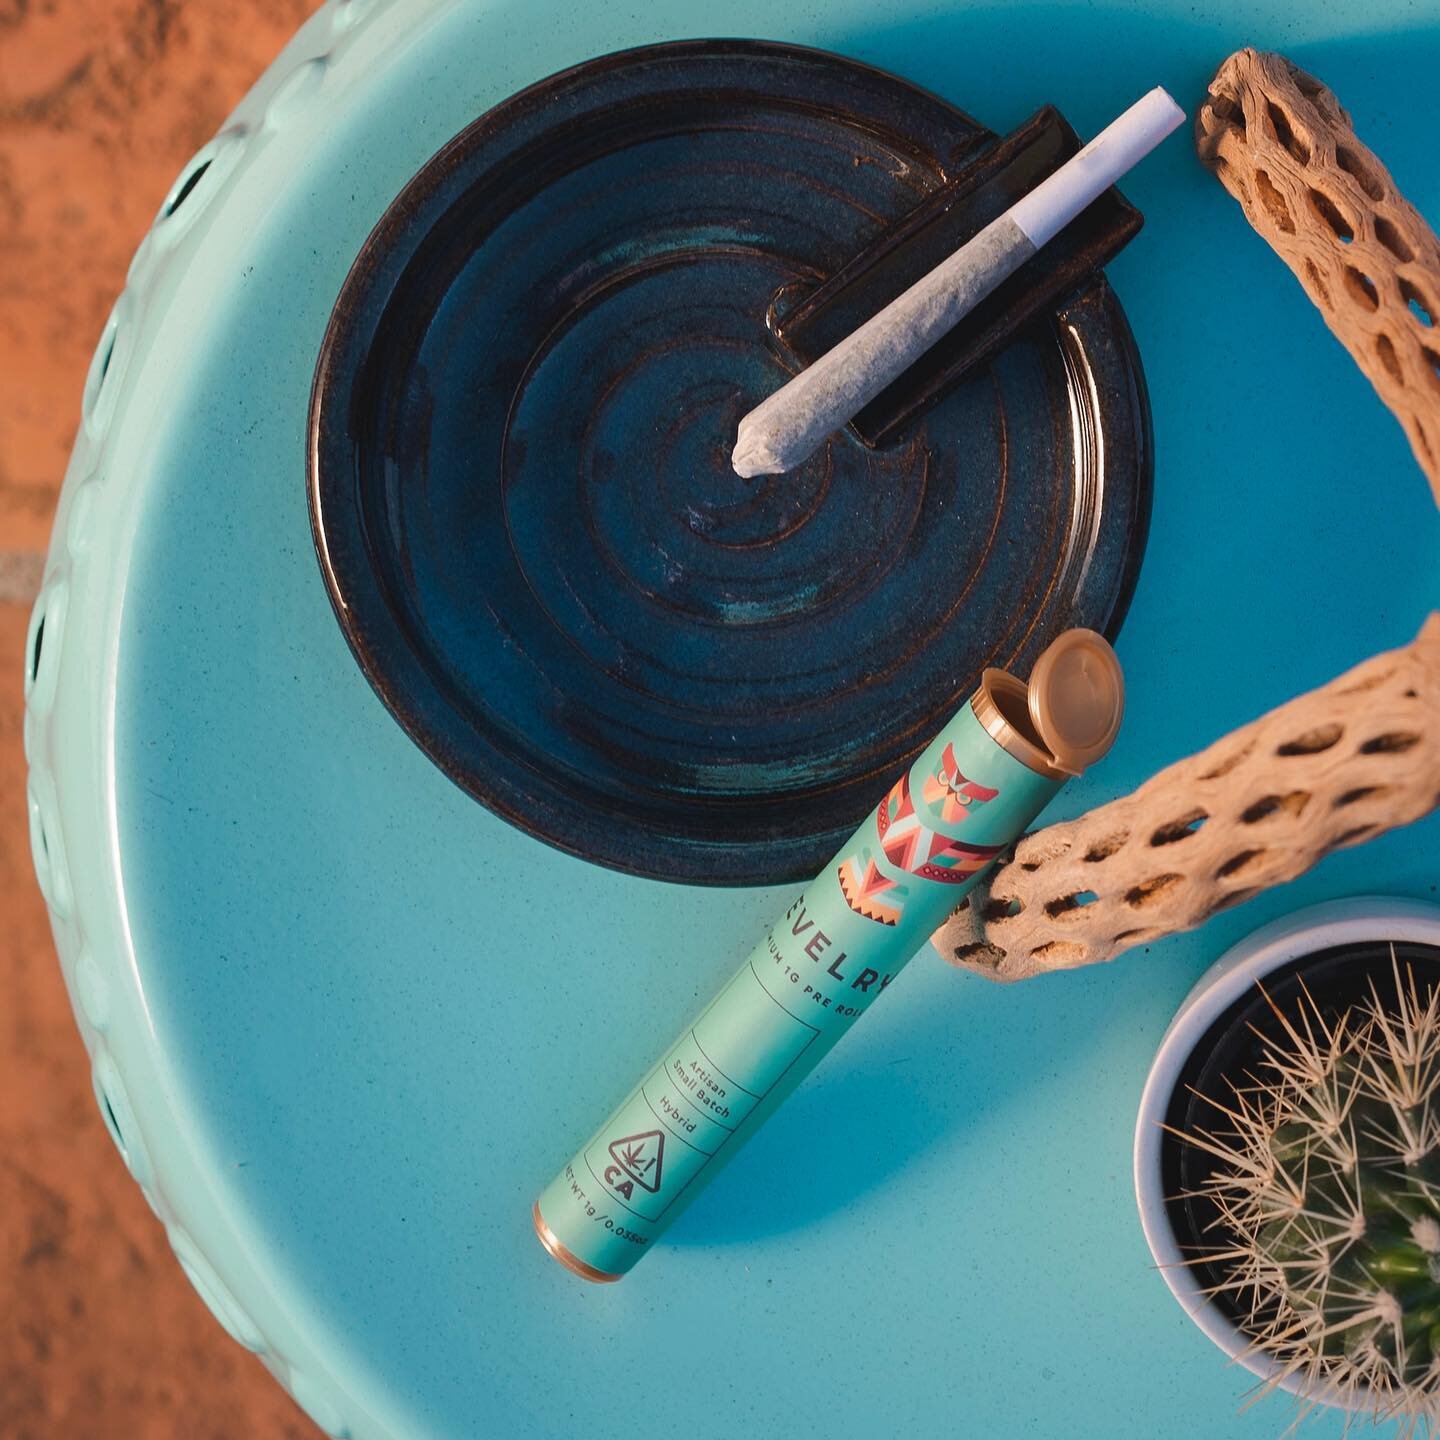 One Gram Pre-rolls are back and here for a good time.🌵#offtheclock #revelryherbco